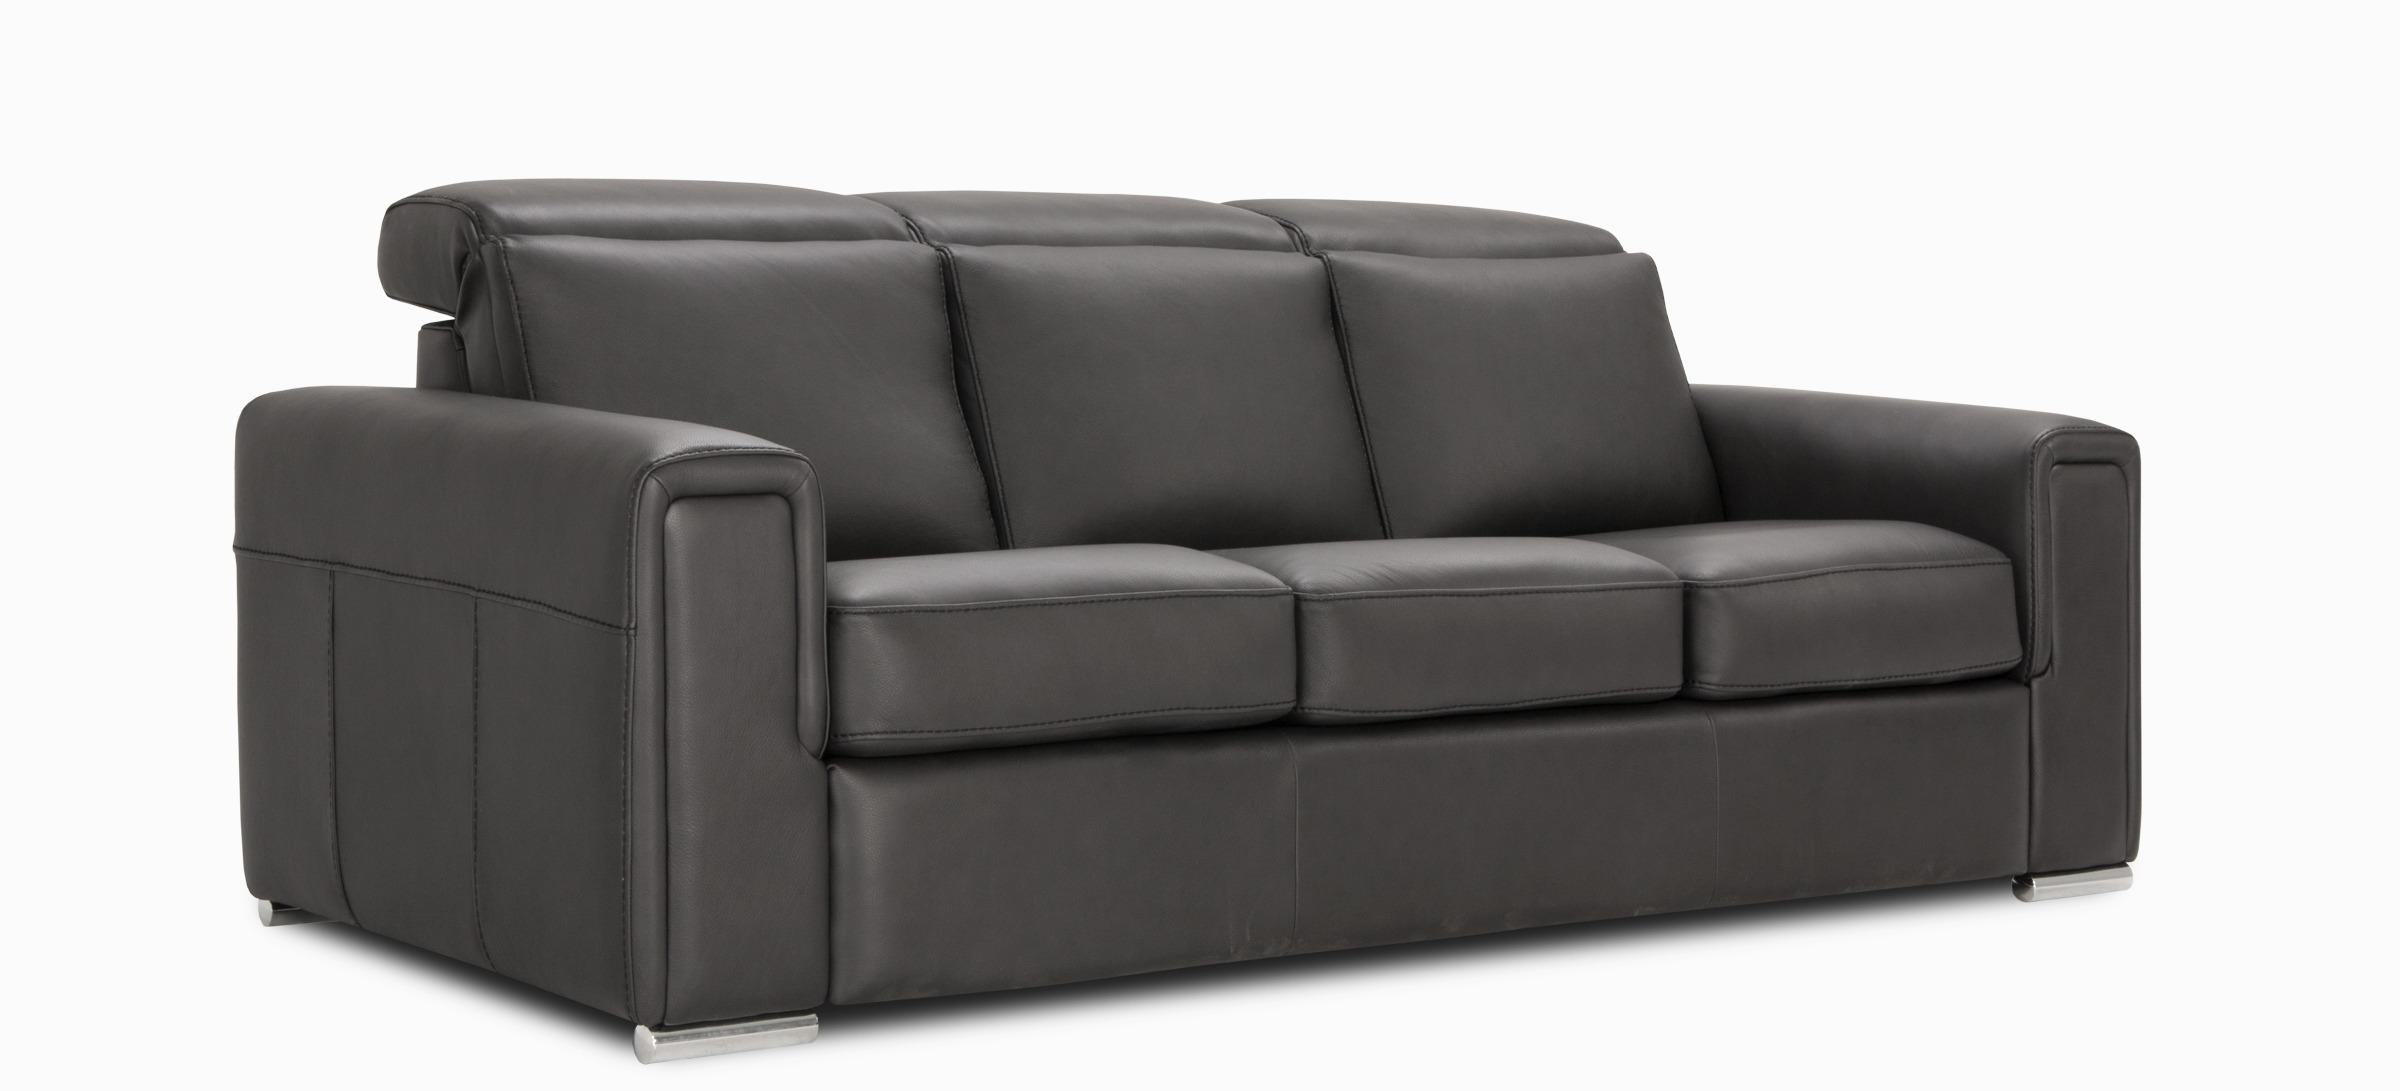 Cologne_sofa_cassiopee_charcoal_side2